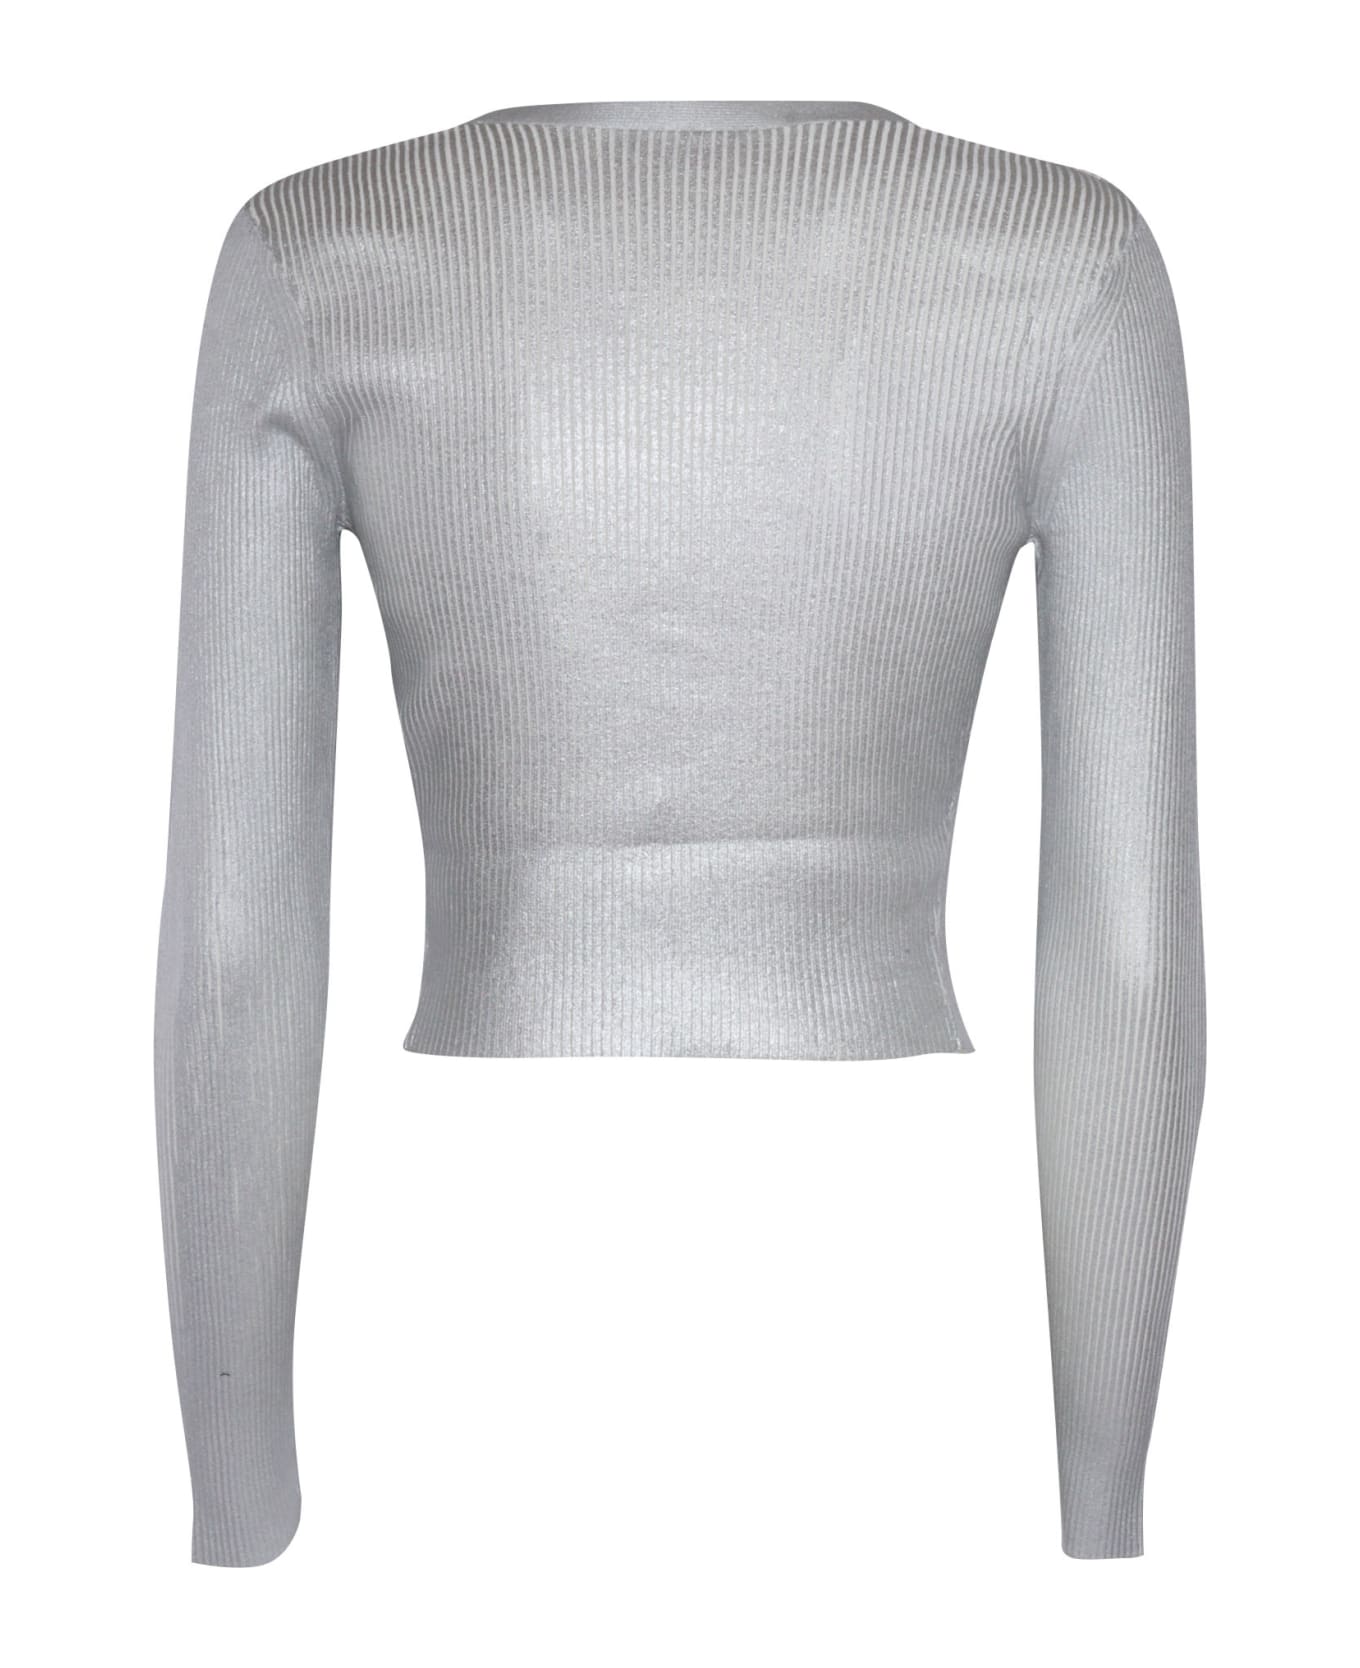 Elisabetta Franchi Cropped Silver Tricot Ribbed Sweater - SILVER